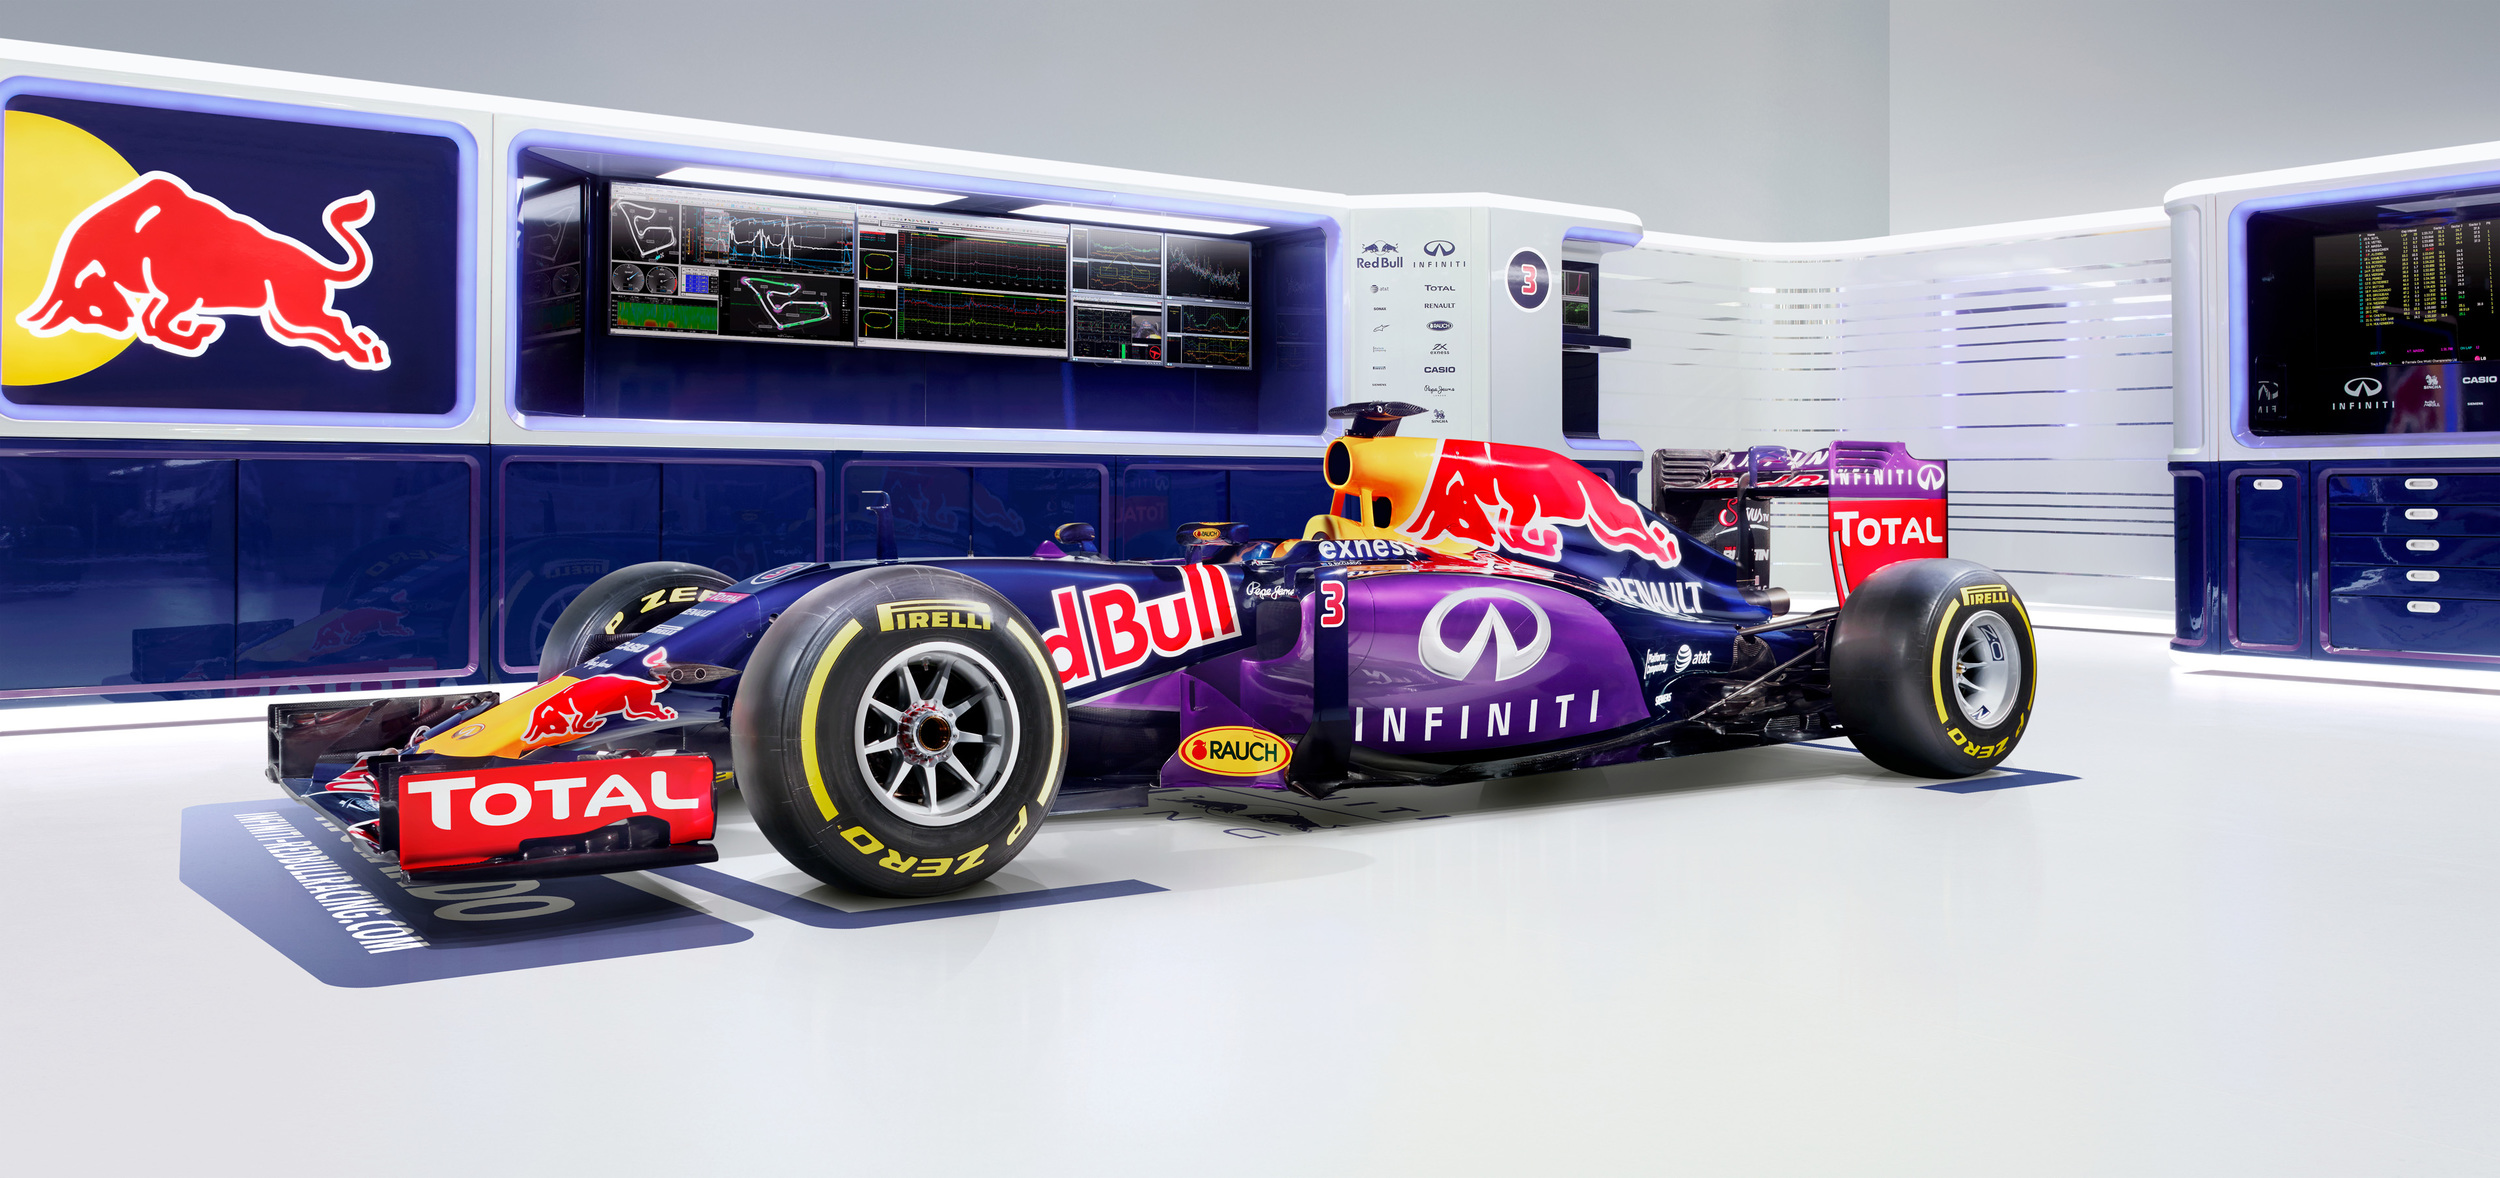 Red Bull RB13 - Wikipedia